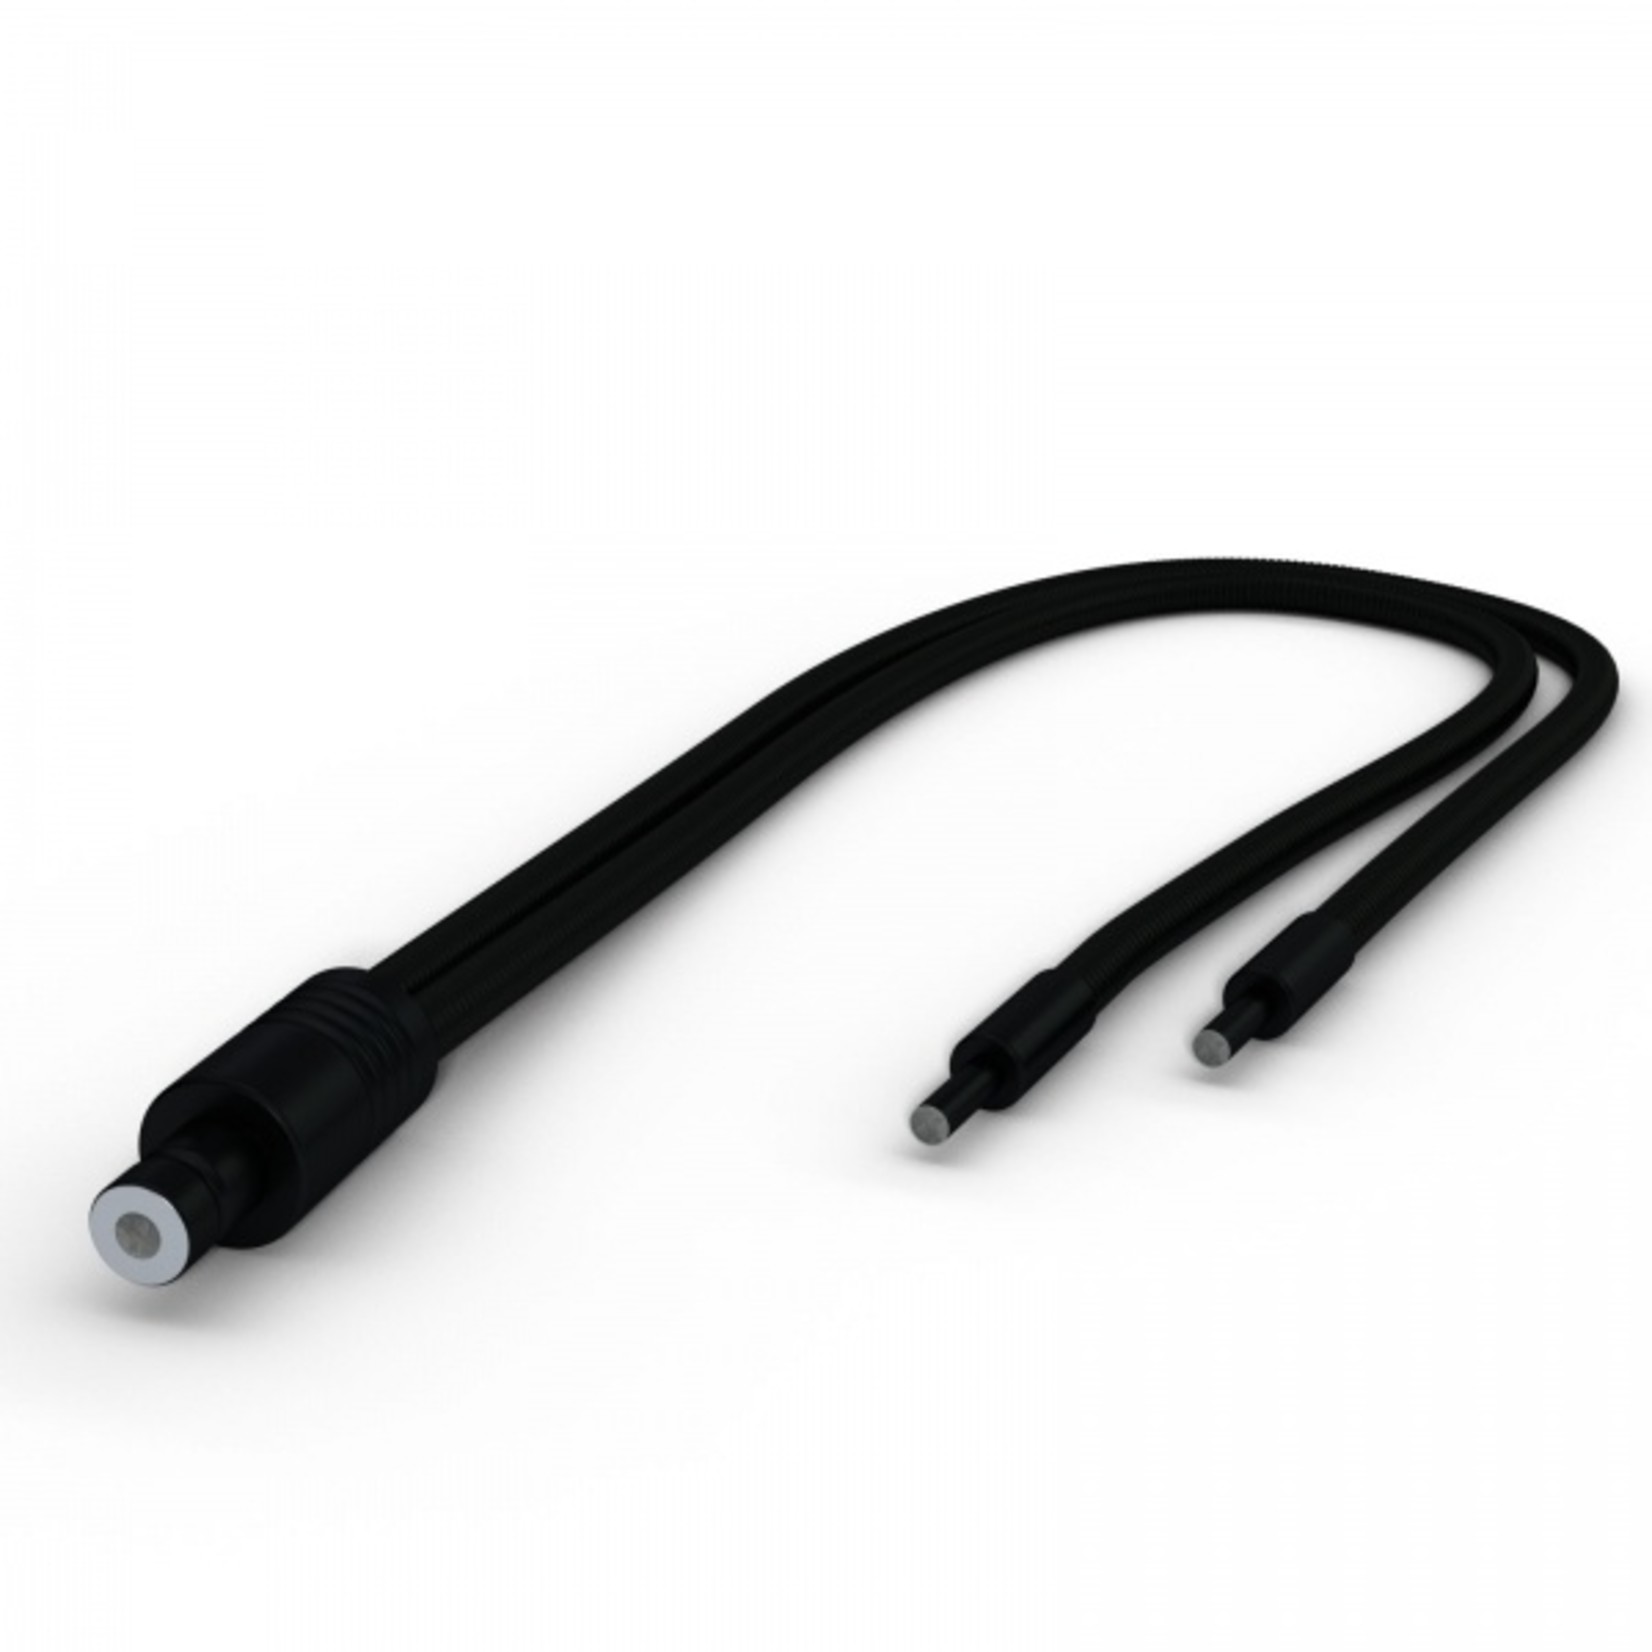 Flexible light guide GLF2 in two lengths and active diameter 4.5 mm